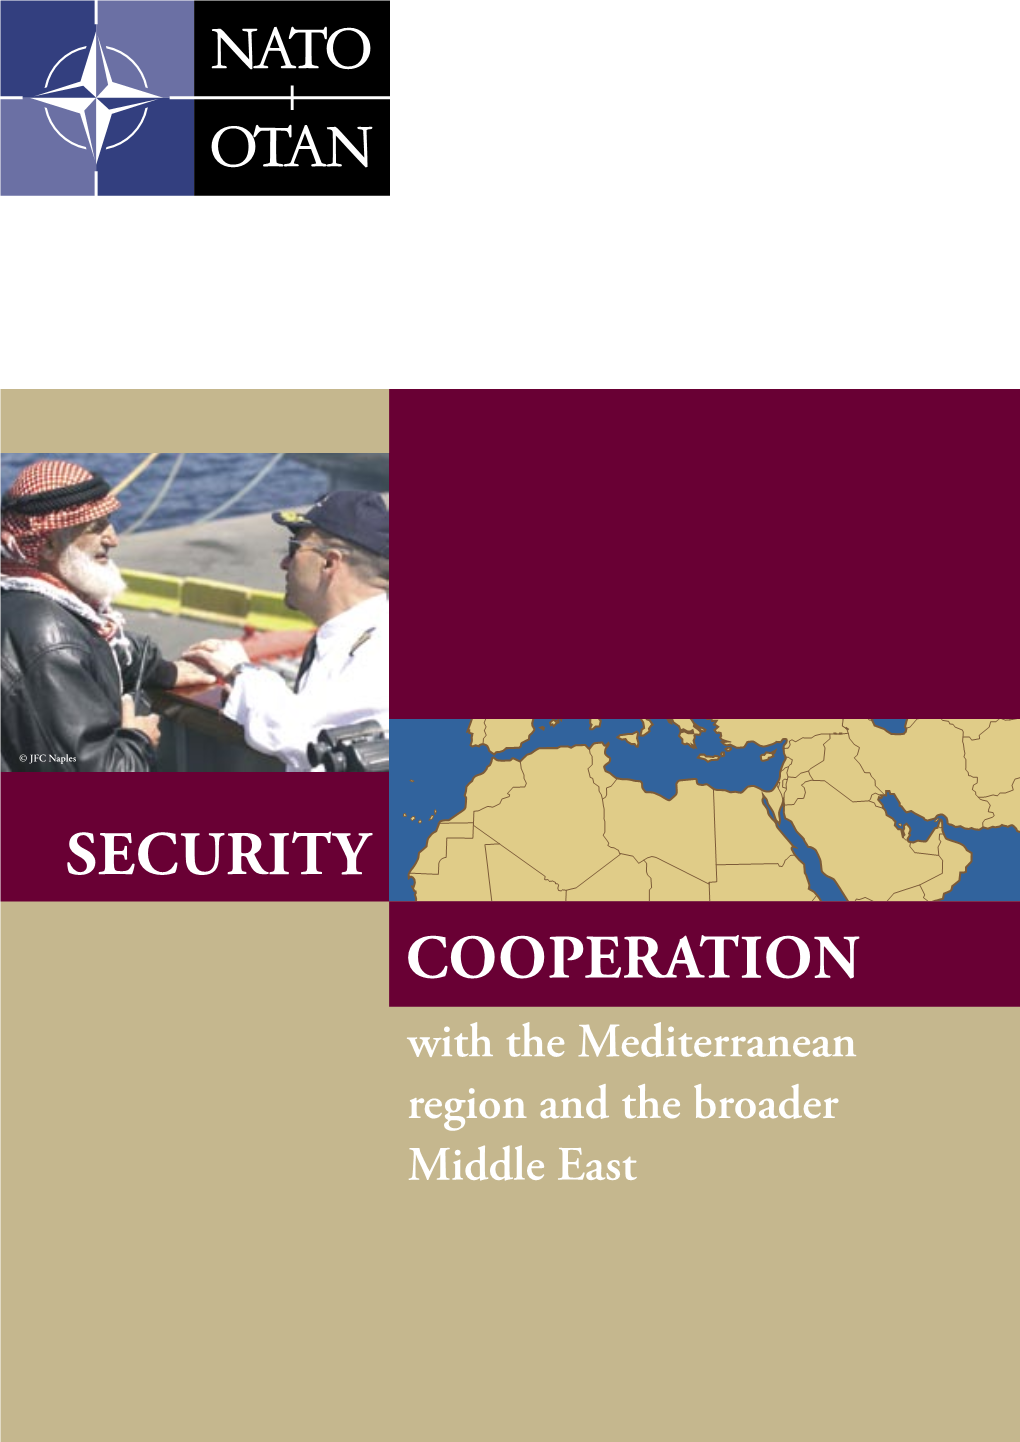 SECURITY COOPERATION with the Mediterranean Region and the Broader Middle East © JFC Naples